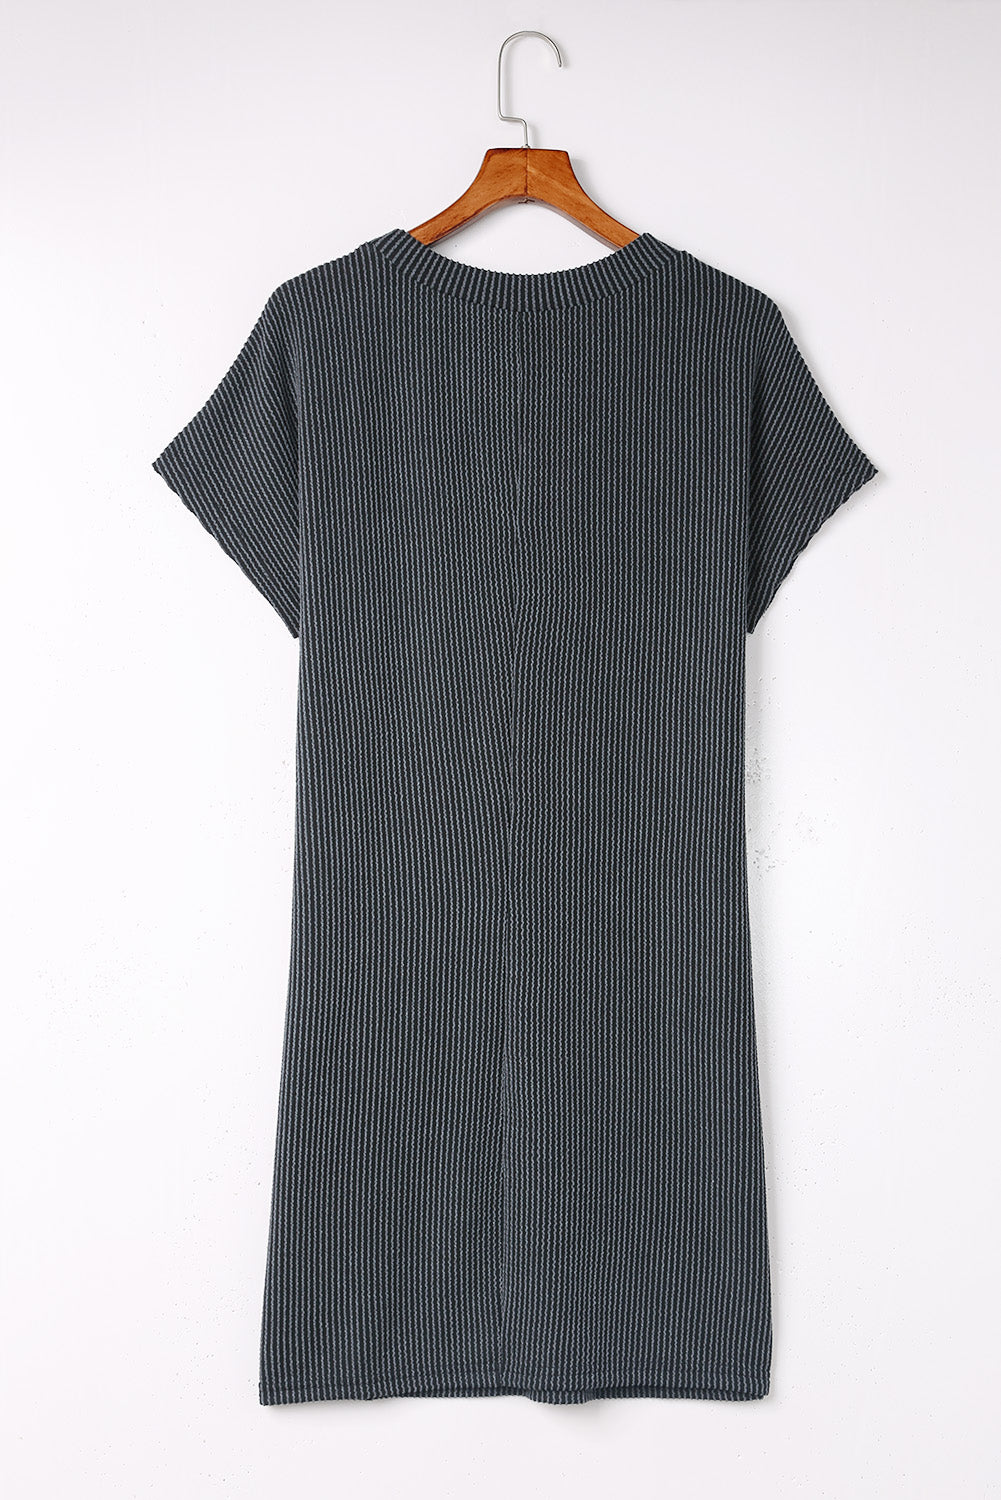 Blue Ribbed Chest Pocket Casual T Shirt Dress